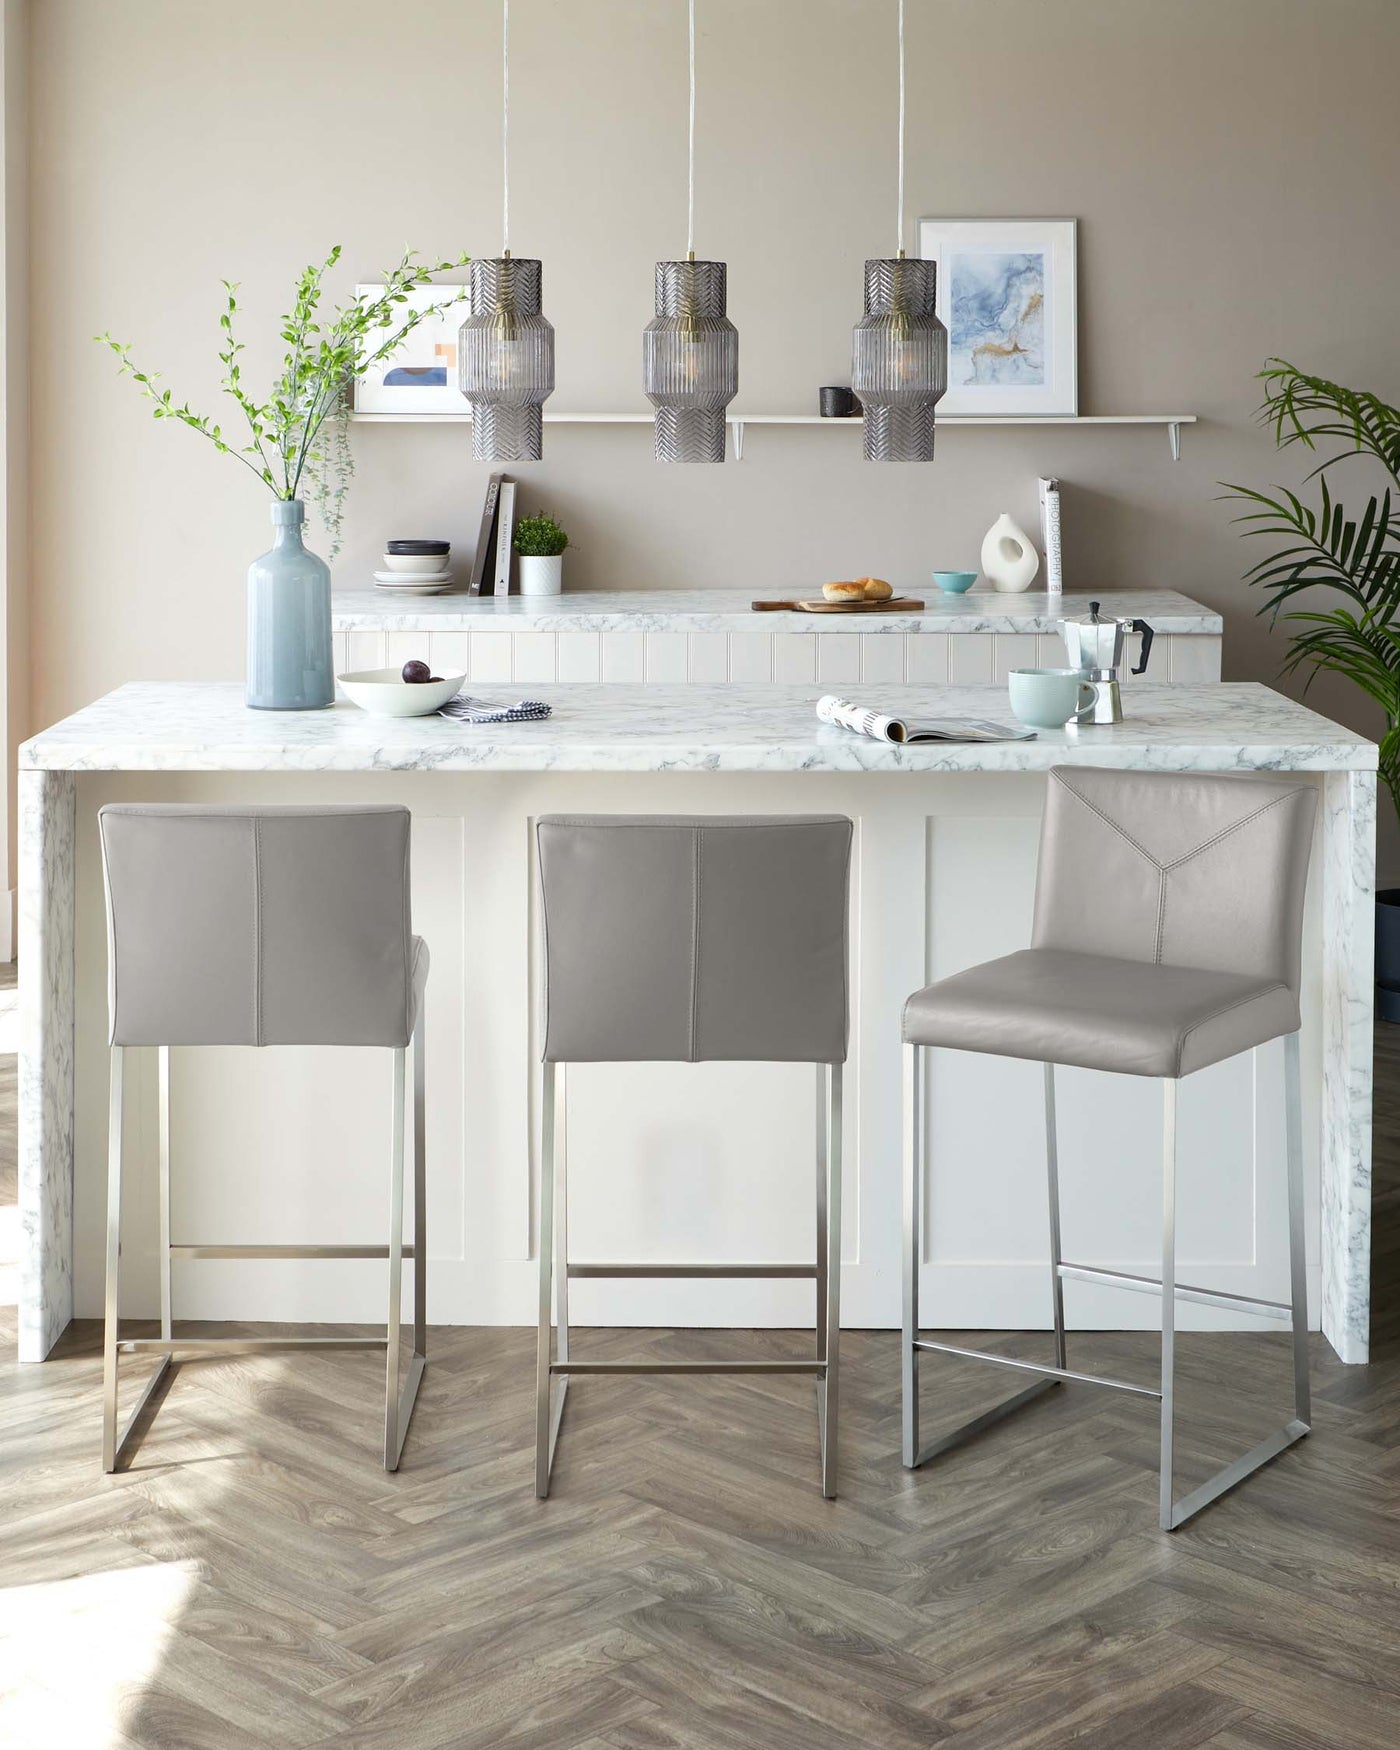 Three contemporary grey upholstered bar stools with slender metallic legs lined up at a white marble-topped kitchen island.